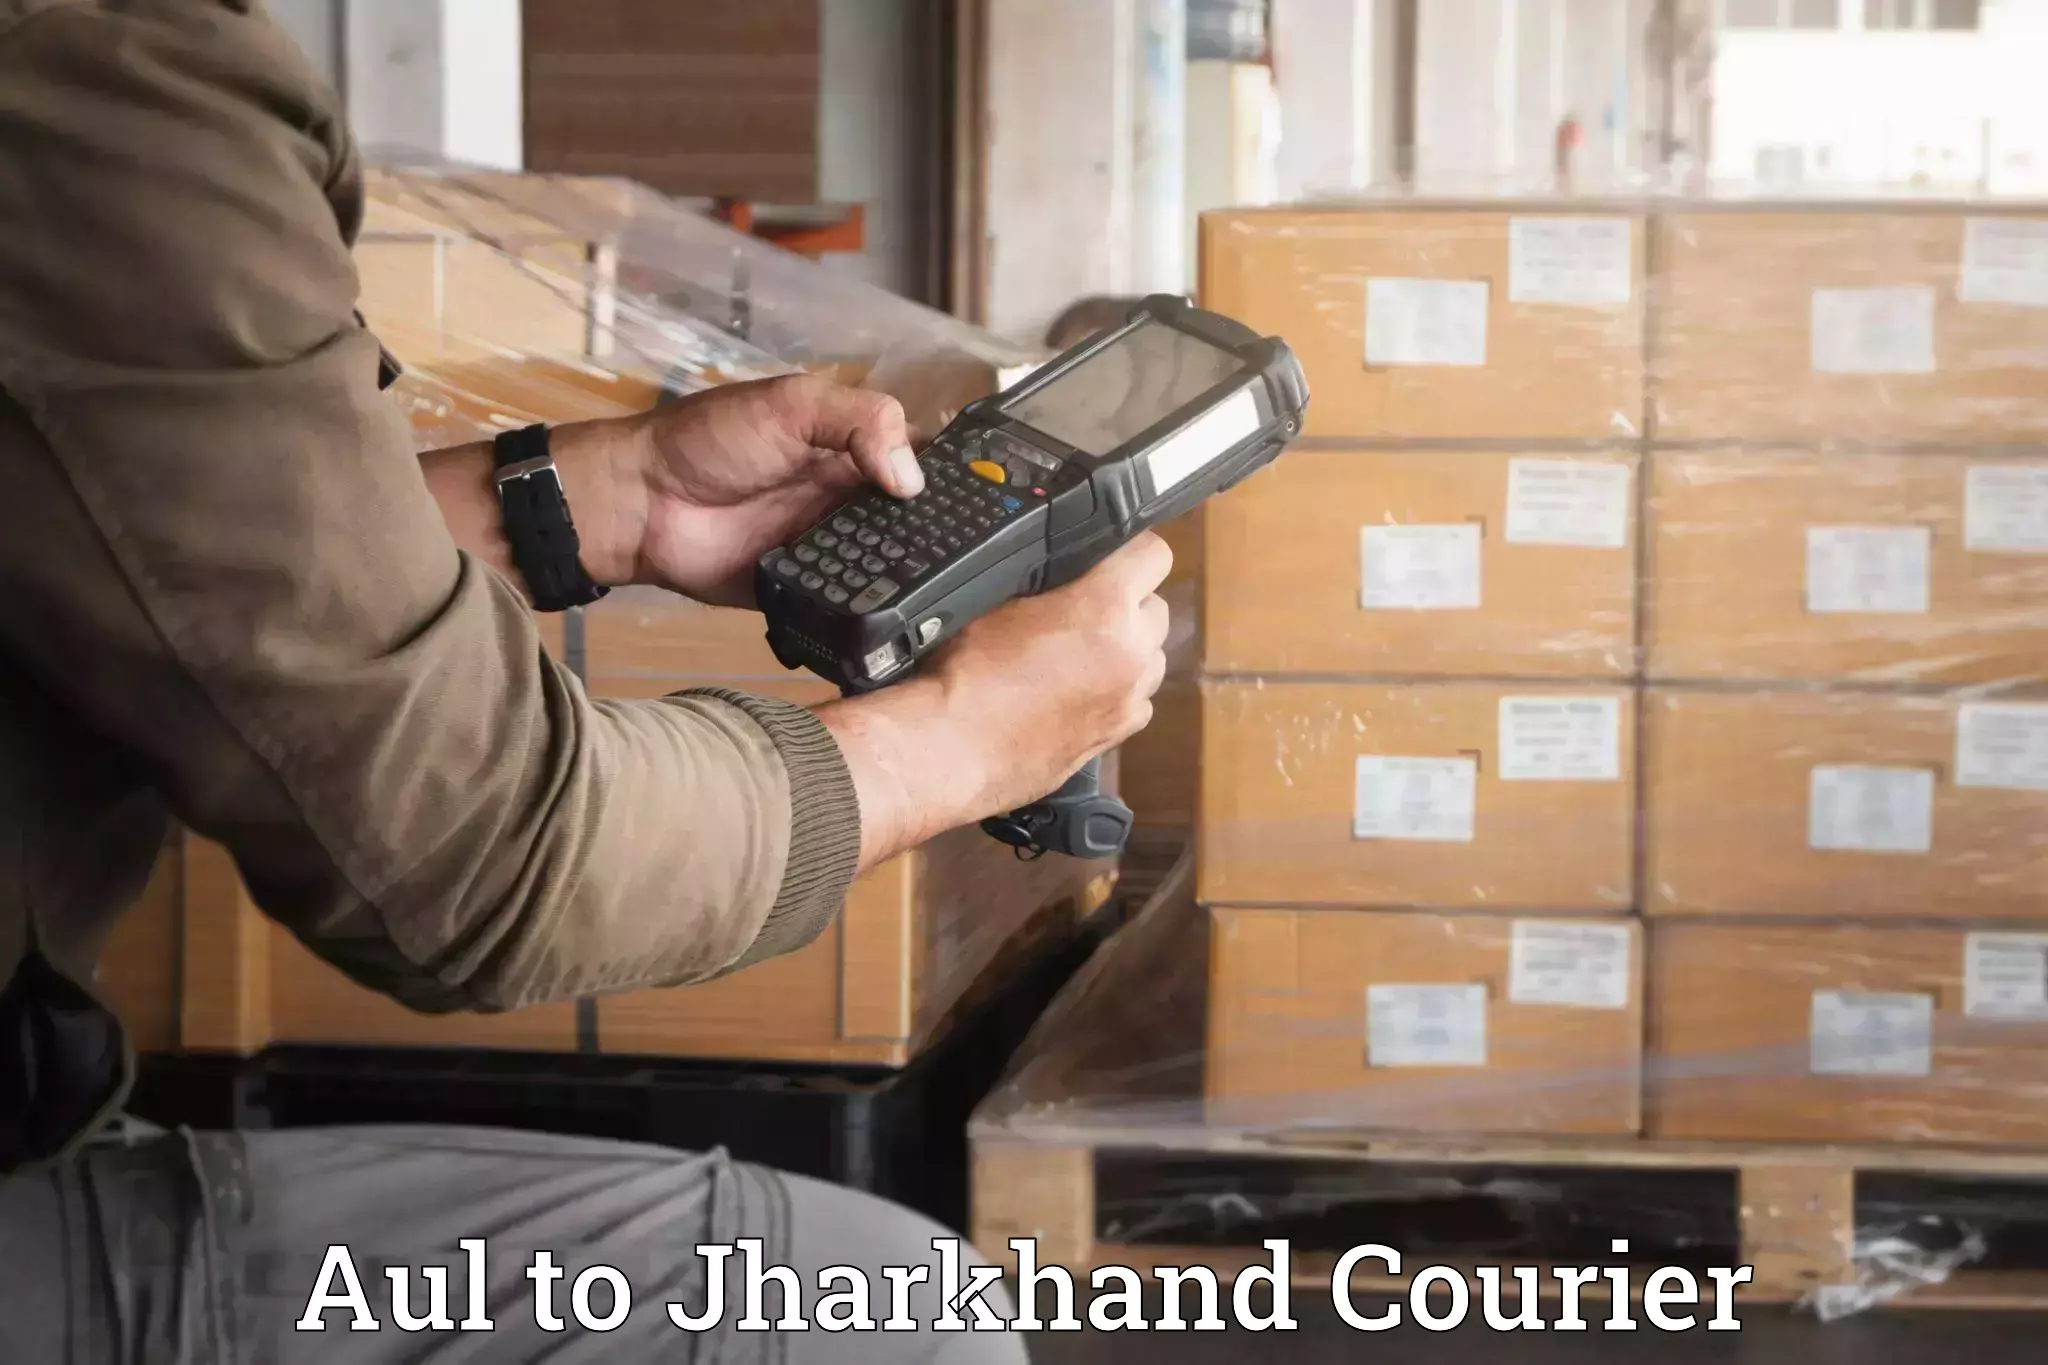 Household goods transport service Aul to Jharkhand